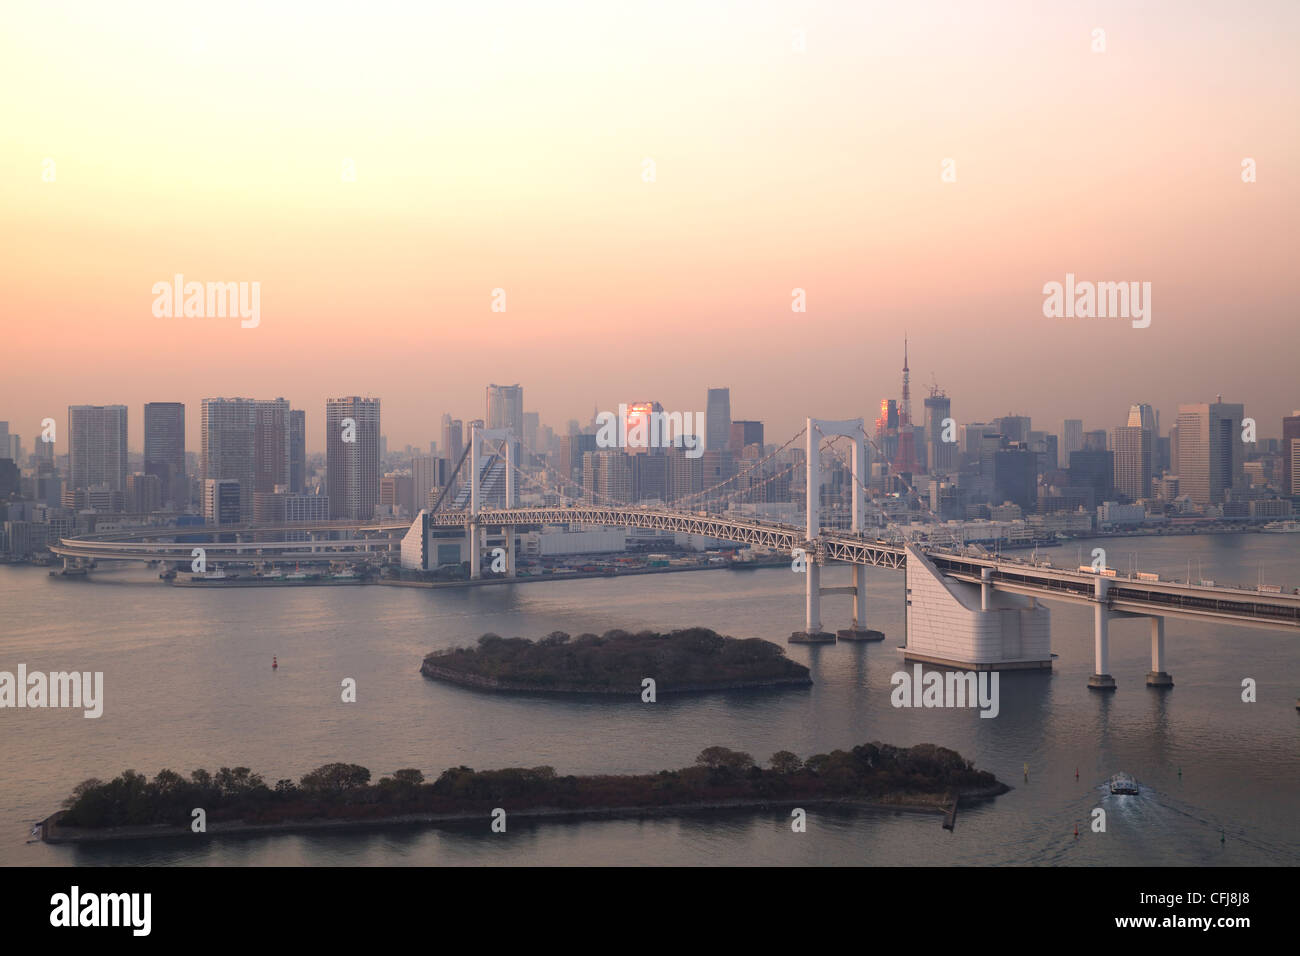 View of Tokyo downtown at night with Rainbow Bridge Stock Photo